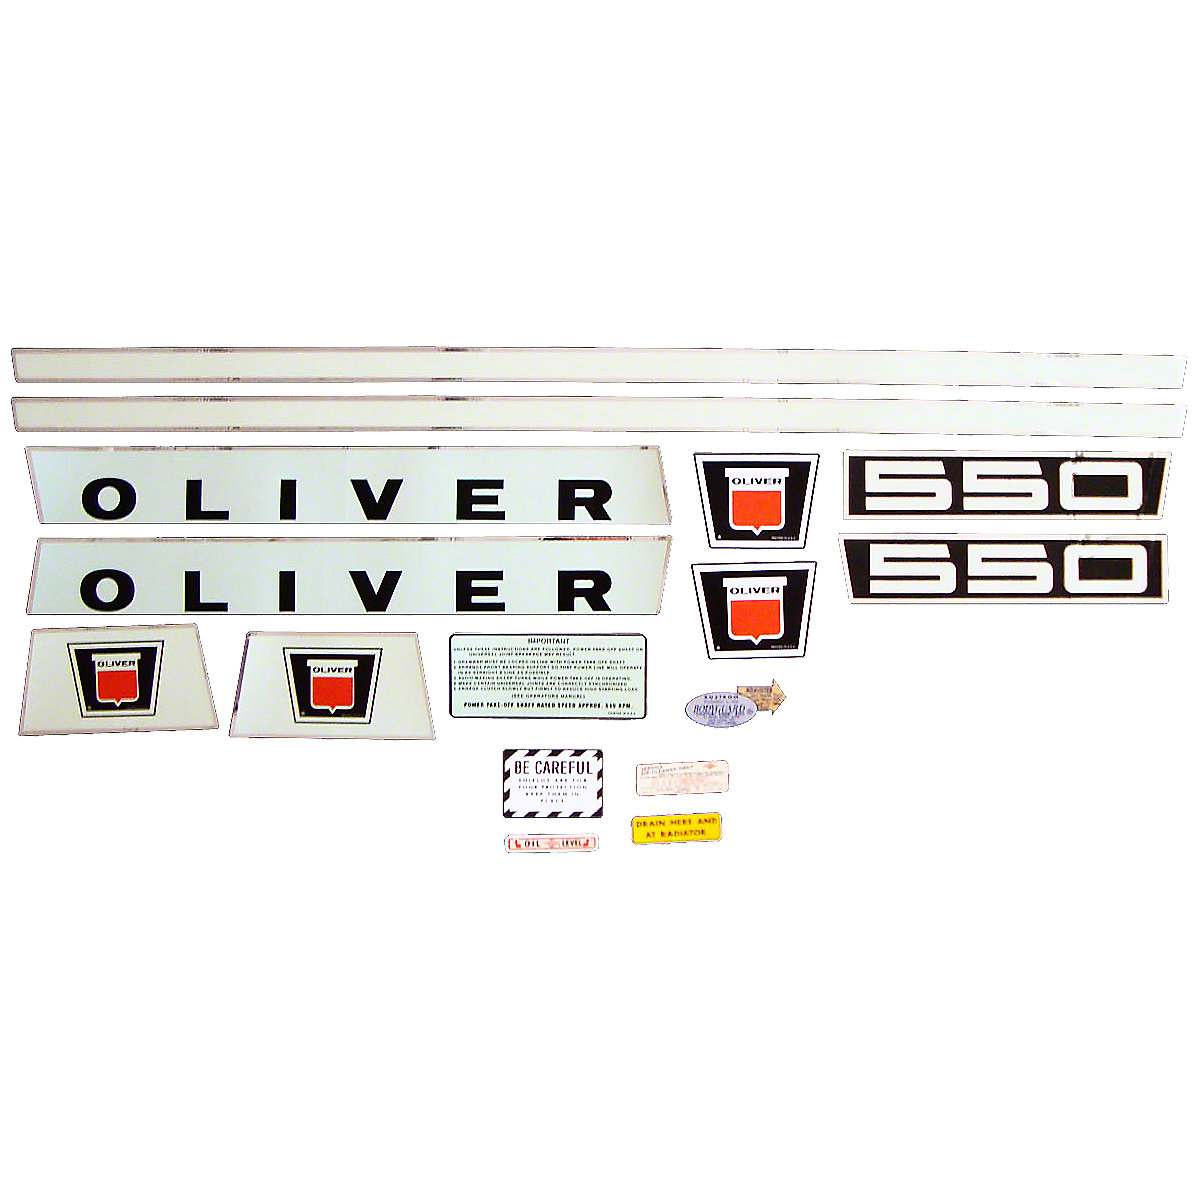 Mylar Decal Set For Oliver 550. Late Models SN#: 112109 and Up.